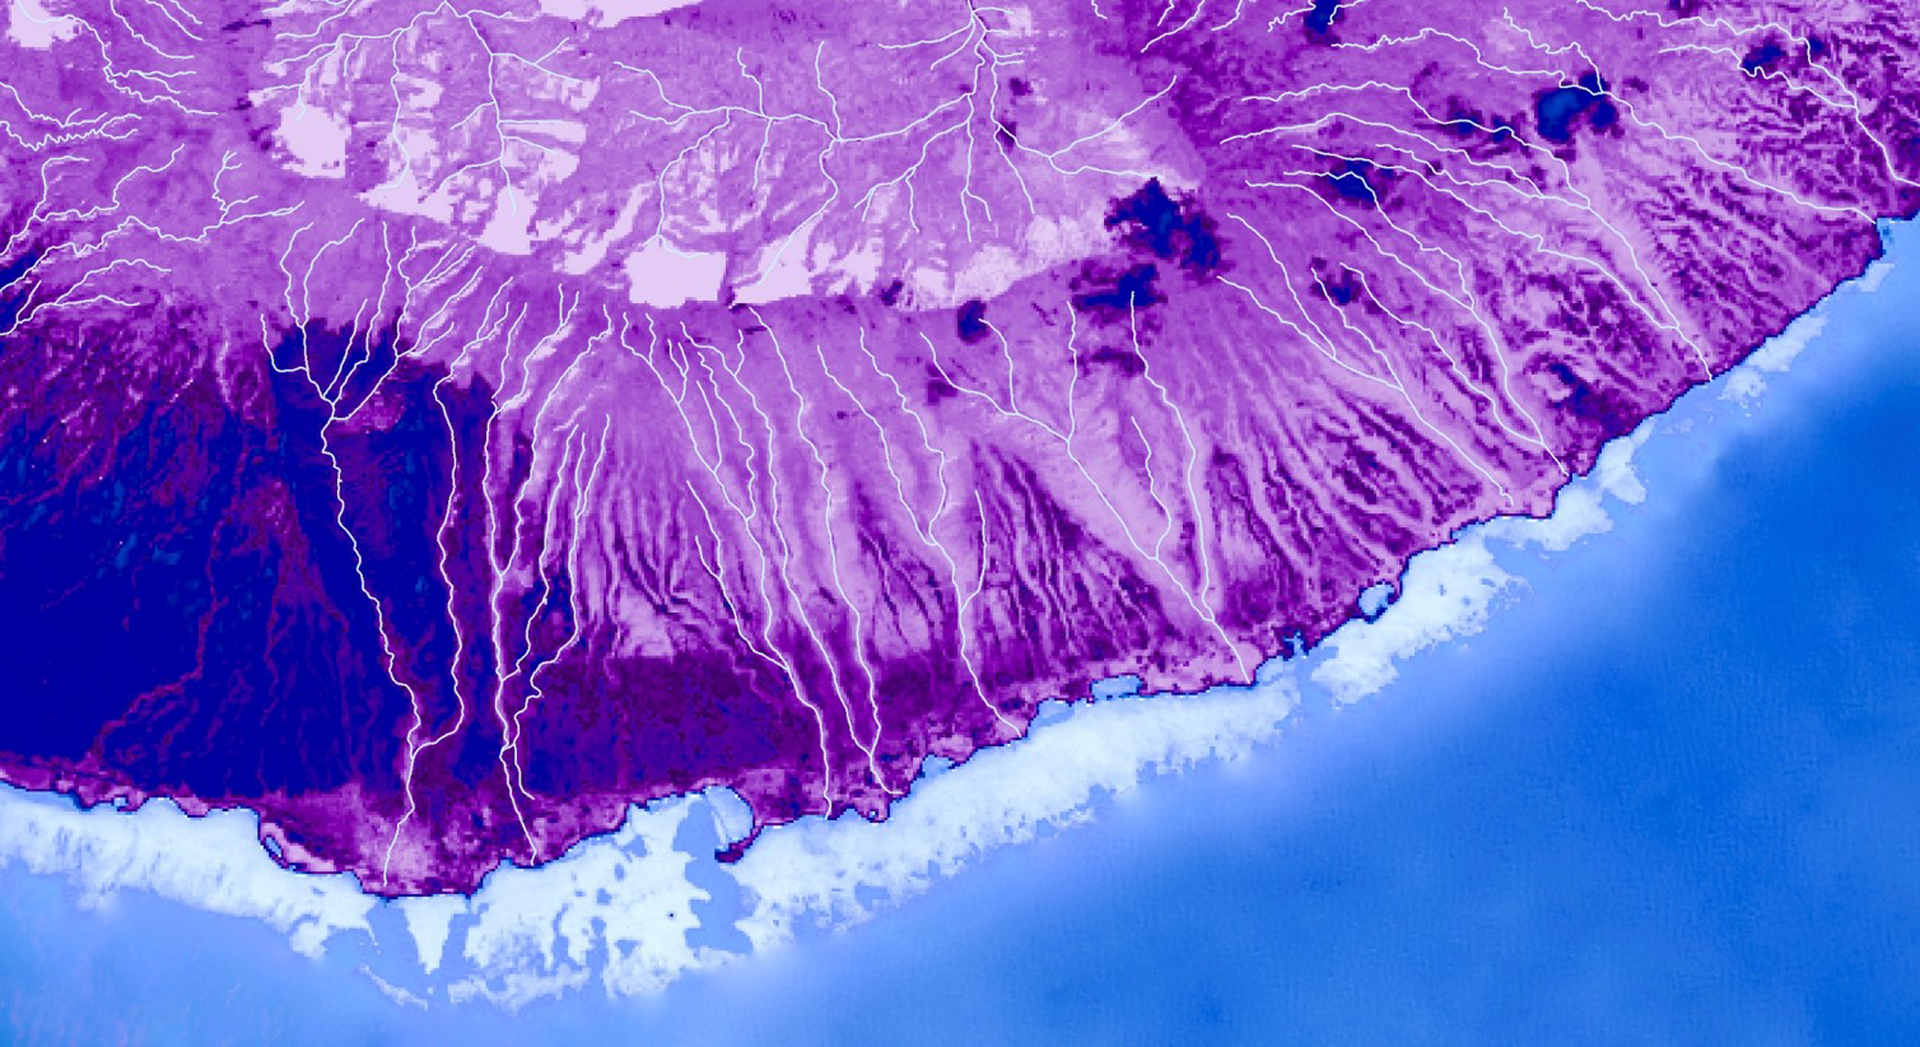 This is a processed Landsat 8 OLI image from January 2019 displaying Normalized Difference Vegetation Index (NDVI) values of Moloka’i, Hawaii. Bright purple colors indicate areas of healthy vegetation and blues represent less productive vegetation, bare ground, and water. NDVI is one of the many indices used to quantify forest health and resulting coastal water turbidity.